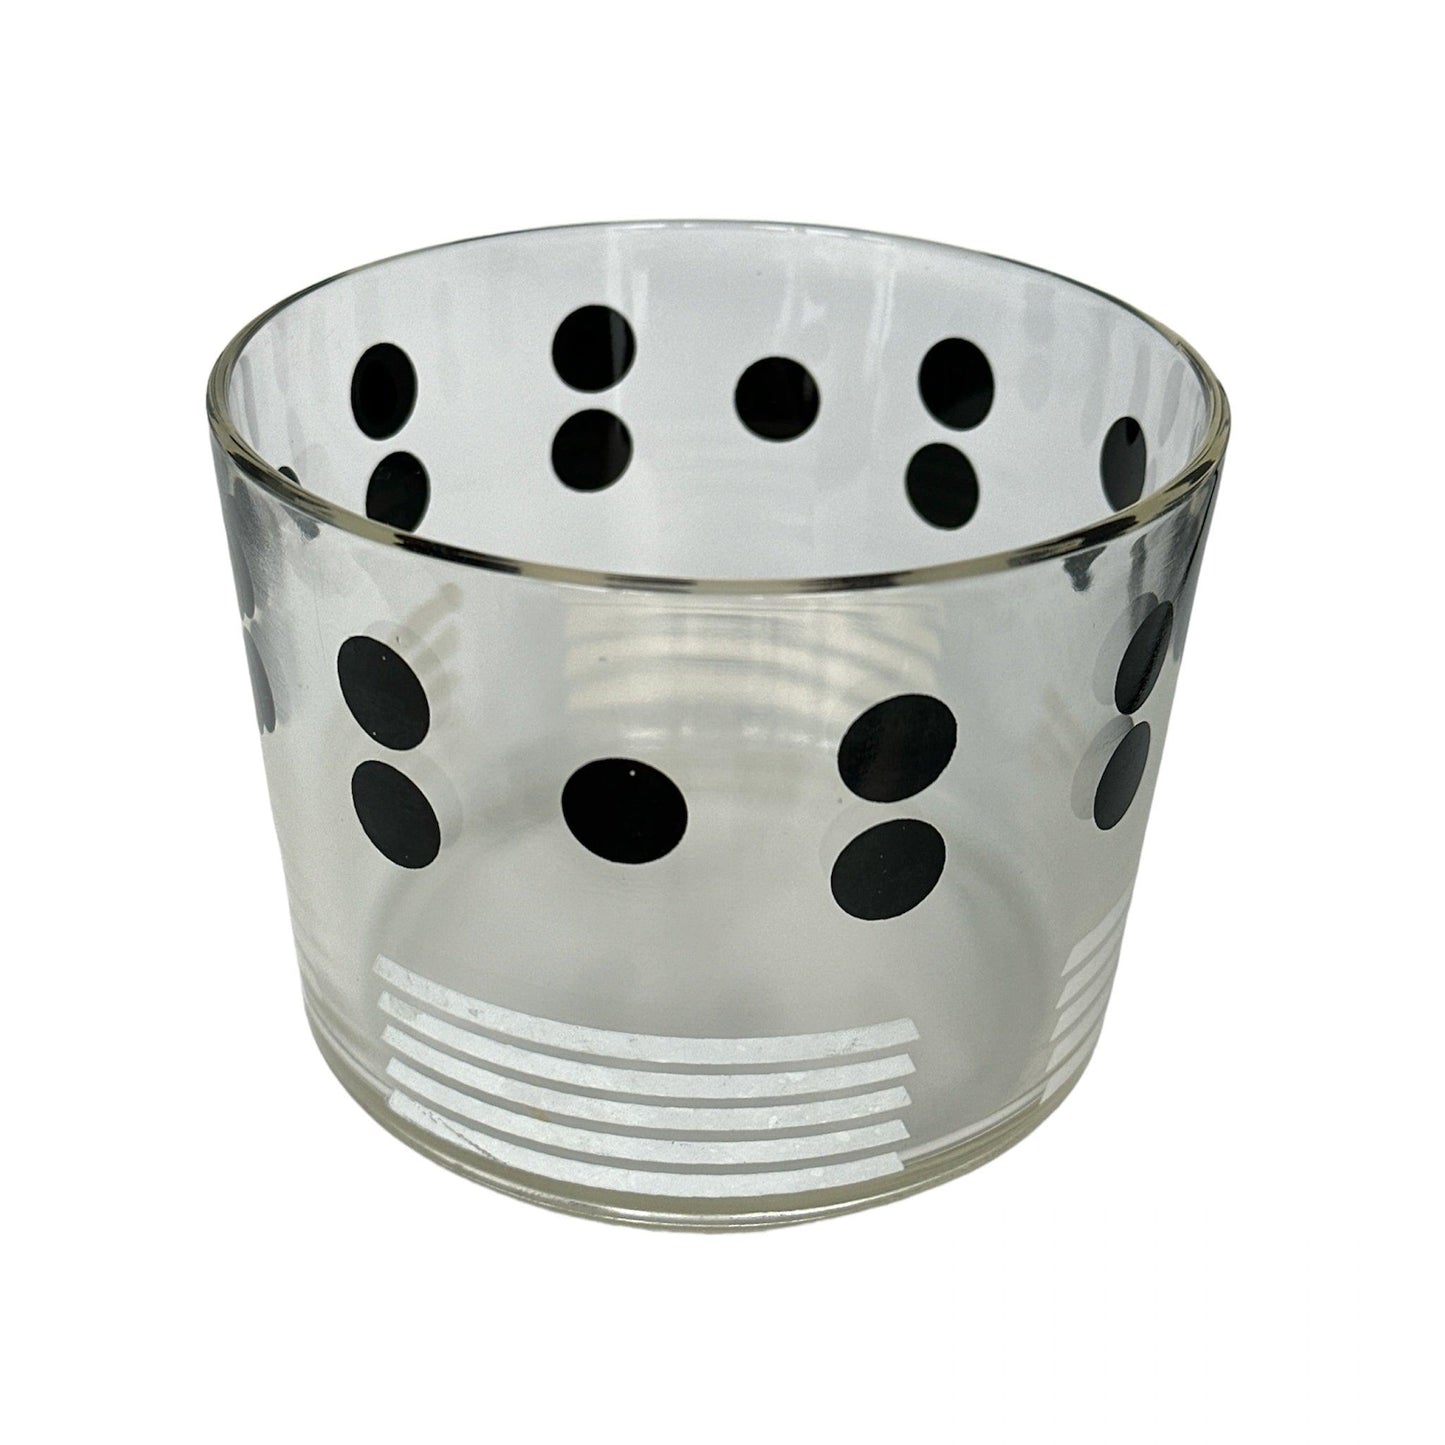 Vintage Glass Polka Dot and Stripe Ice Bucket | A Retro Statement Piece for Your Home